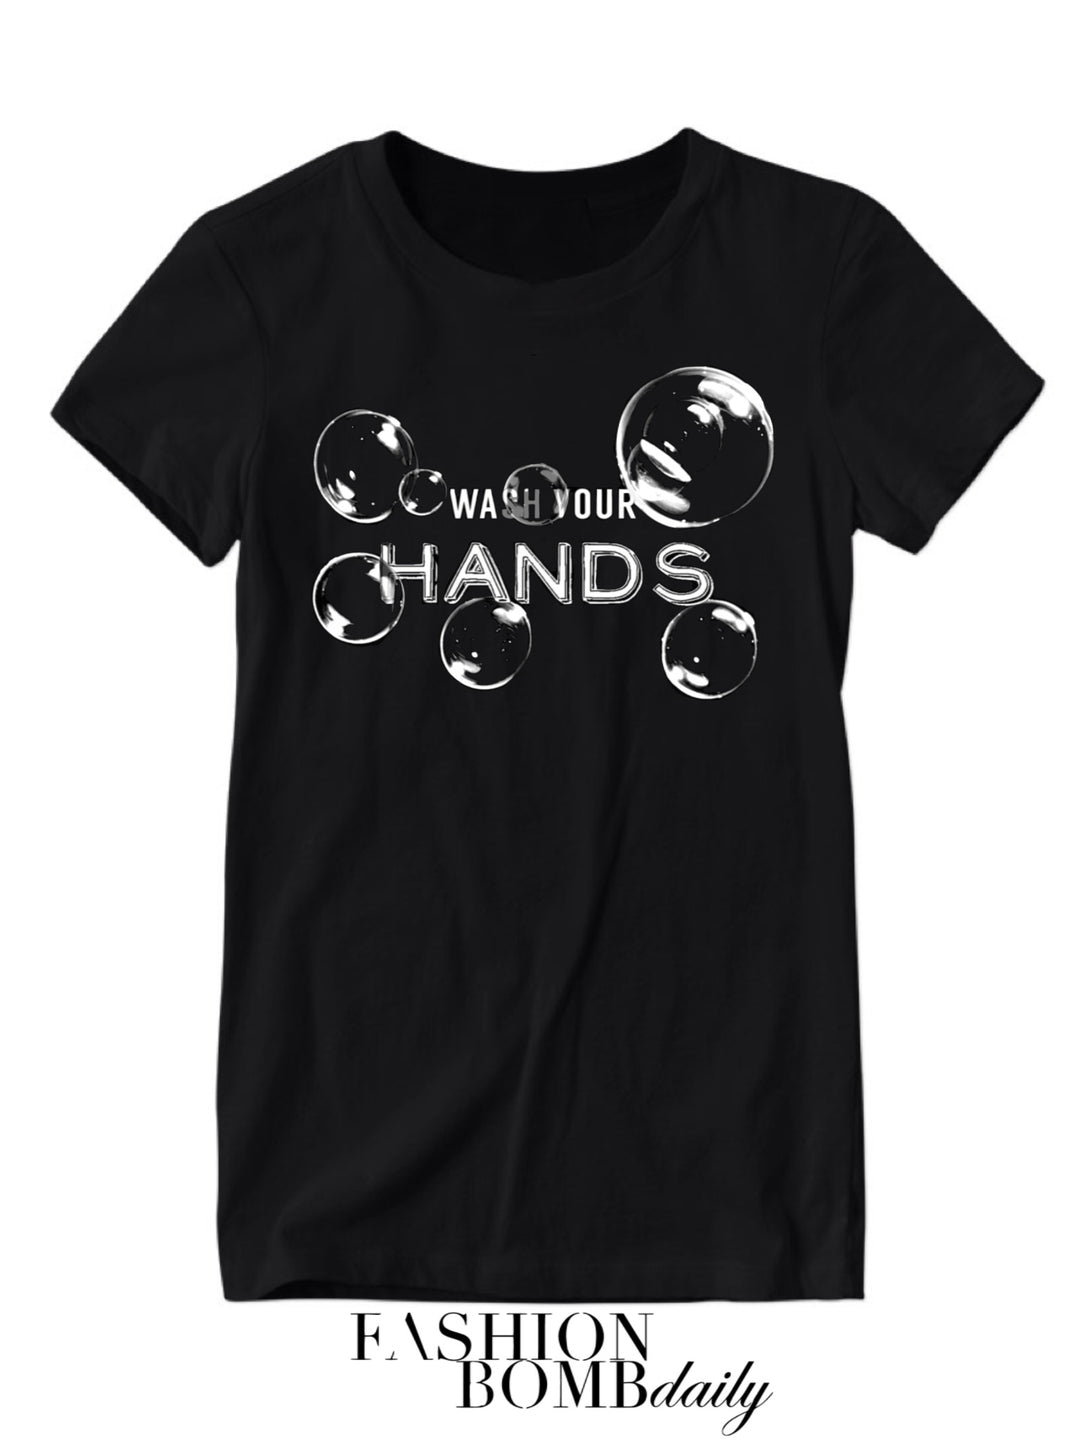 Keylows Wash Your Hands T-Shirt Black